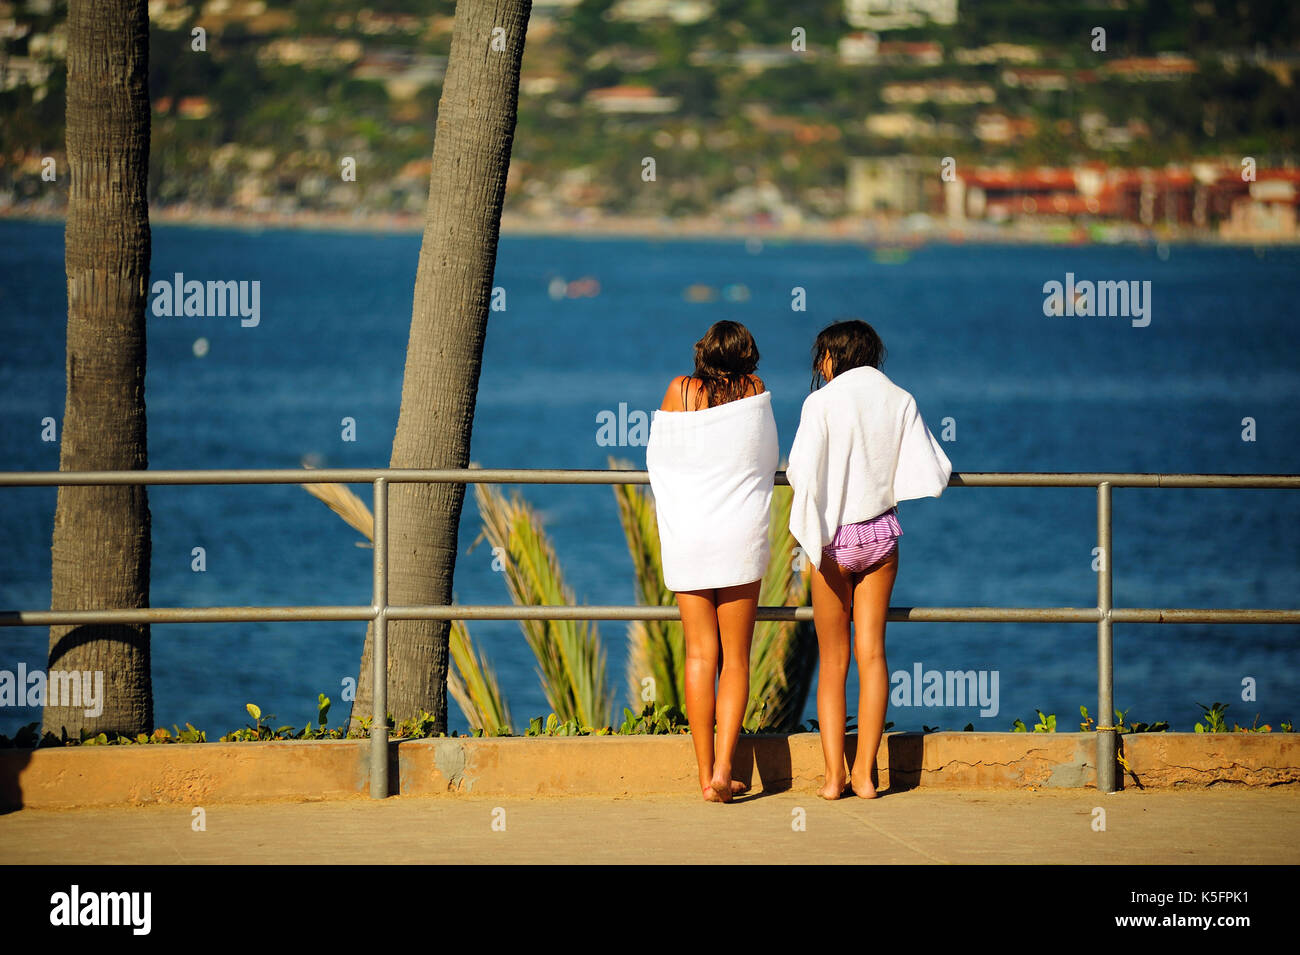 San Diego,United States - on: July 30th, 2013:Two girls in the sun at La Jolla Cove in San Diego during a sunny summer day. Stock Photo